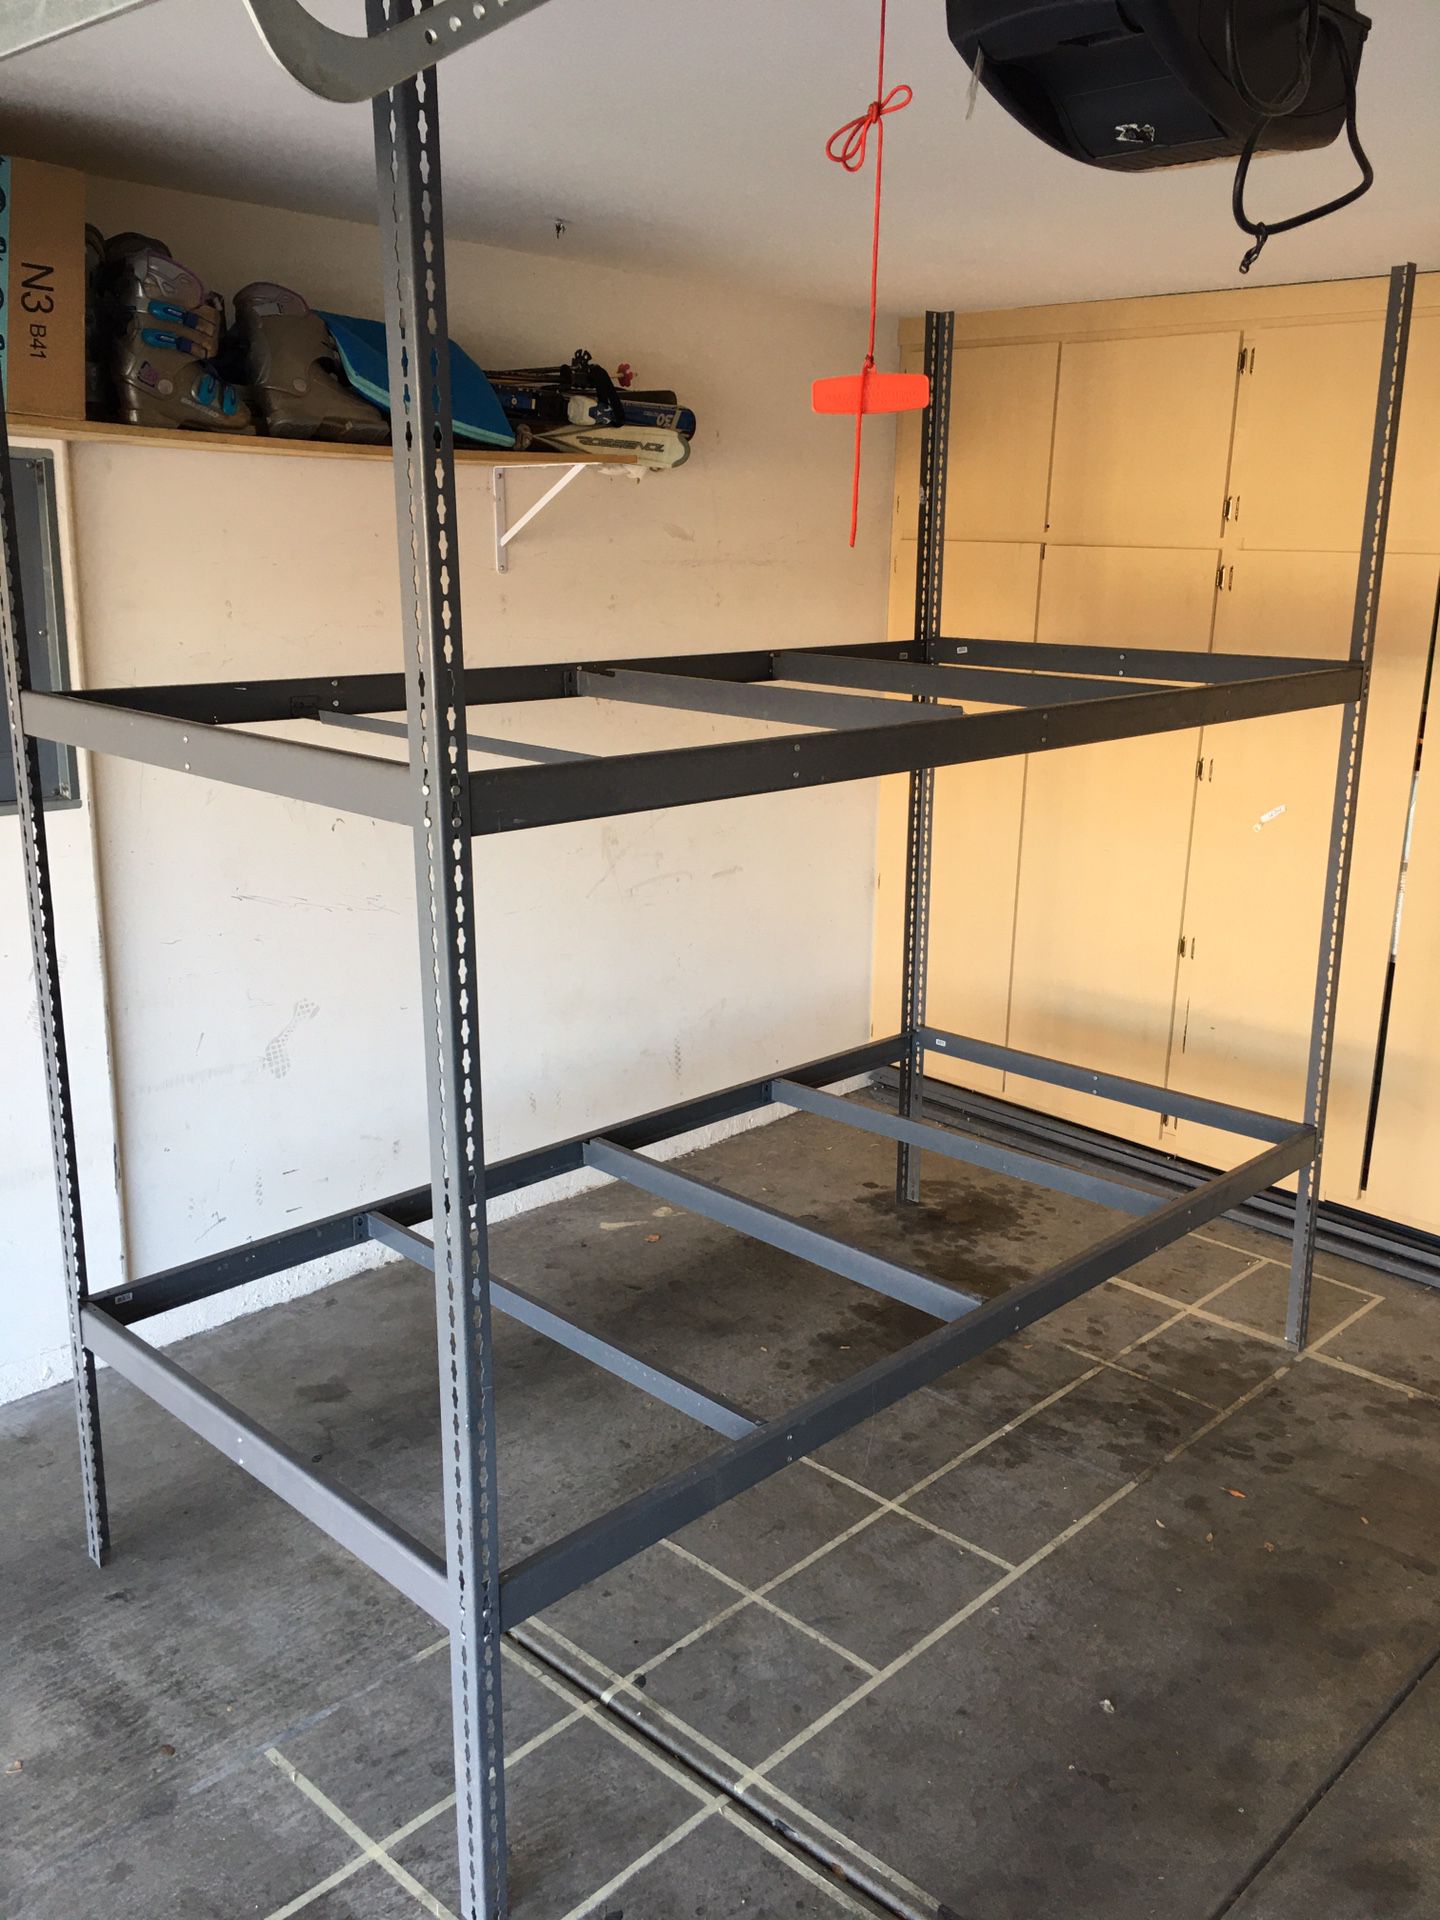 Heavy Duty racks in Bolt-less commercial grade shelves for Garage and Container Storage - Dimensions: H8 8ft, length 8ft, Width 4ft 2 available